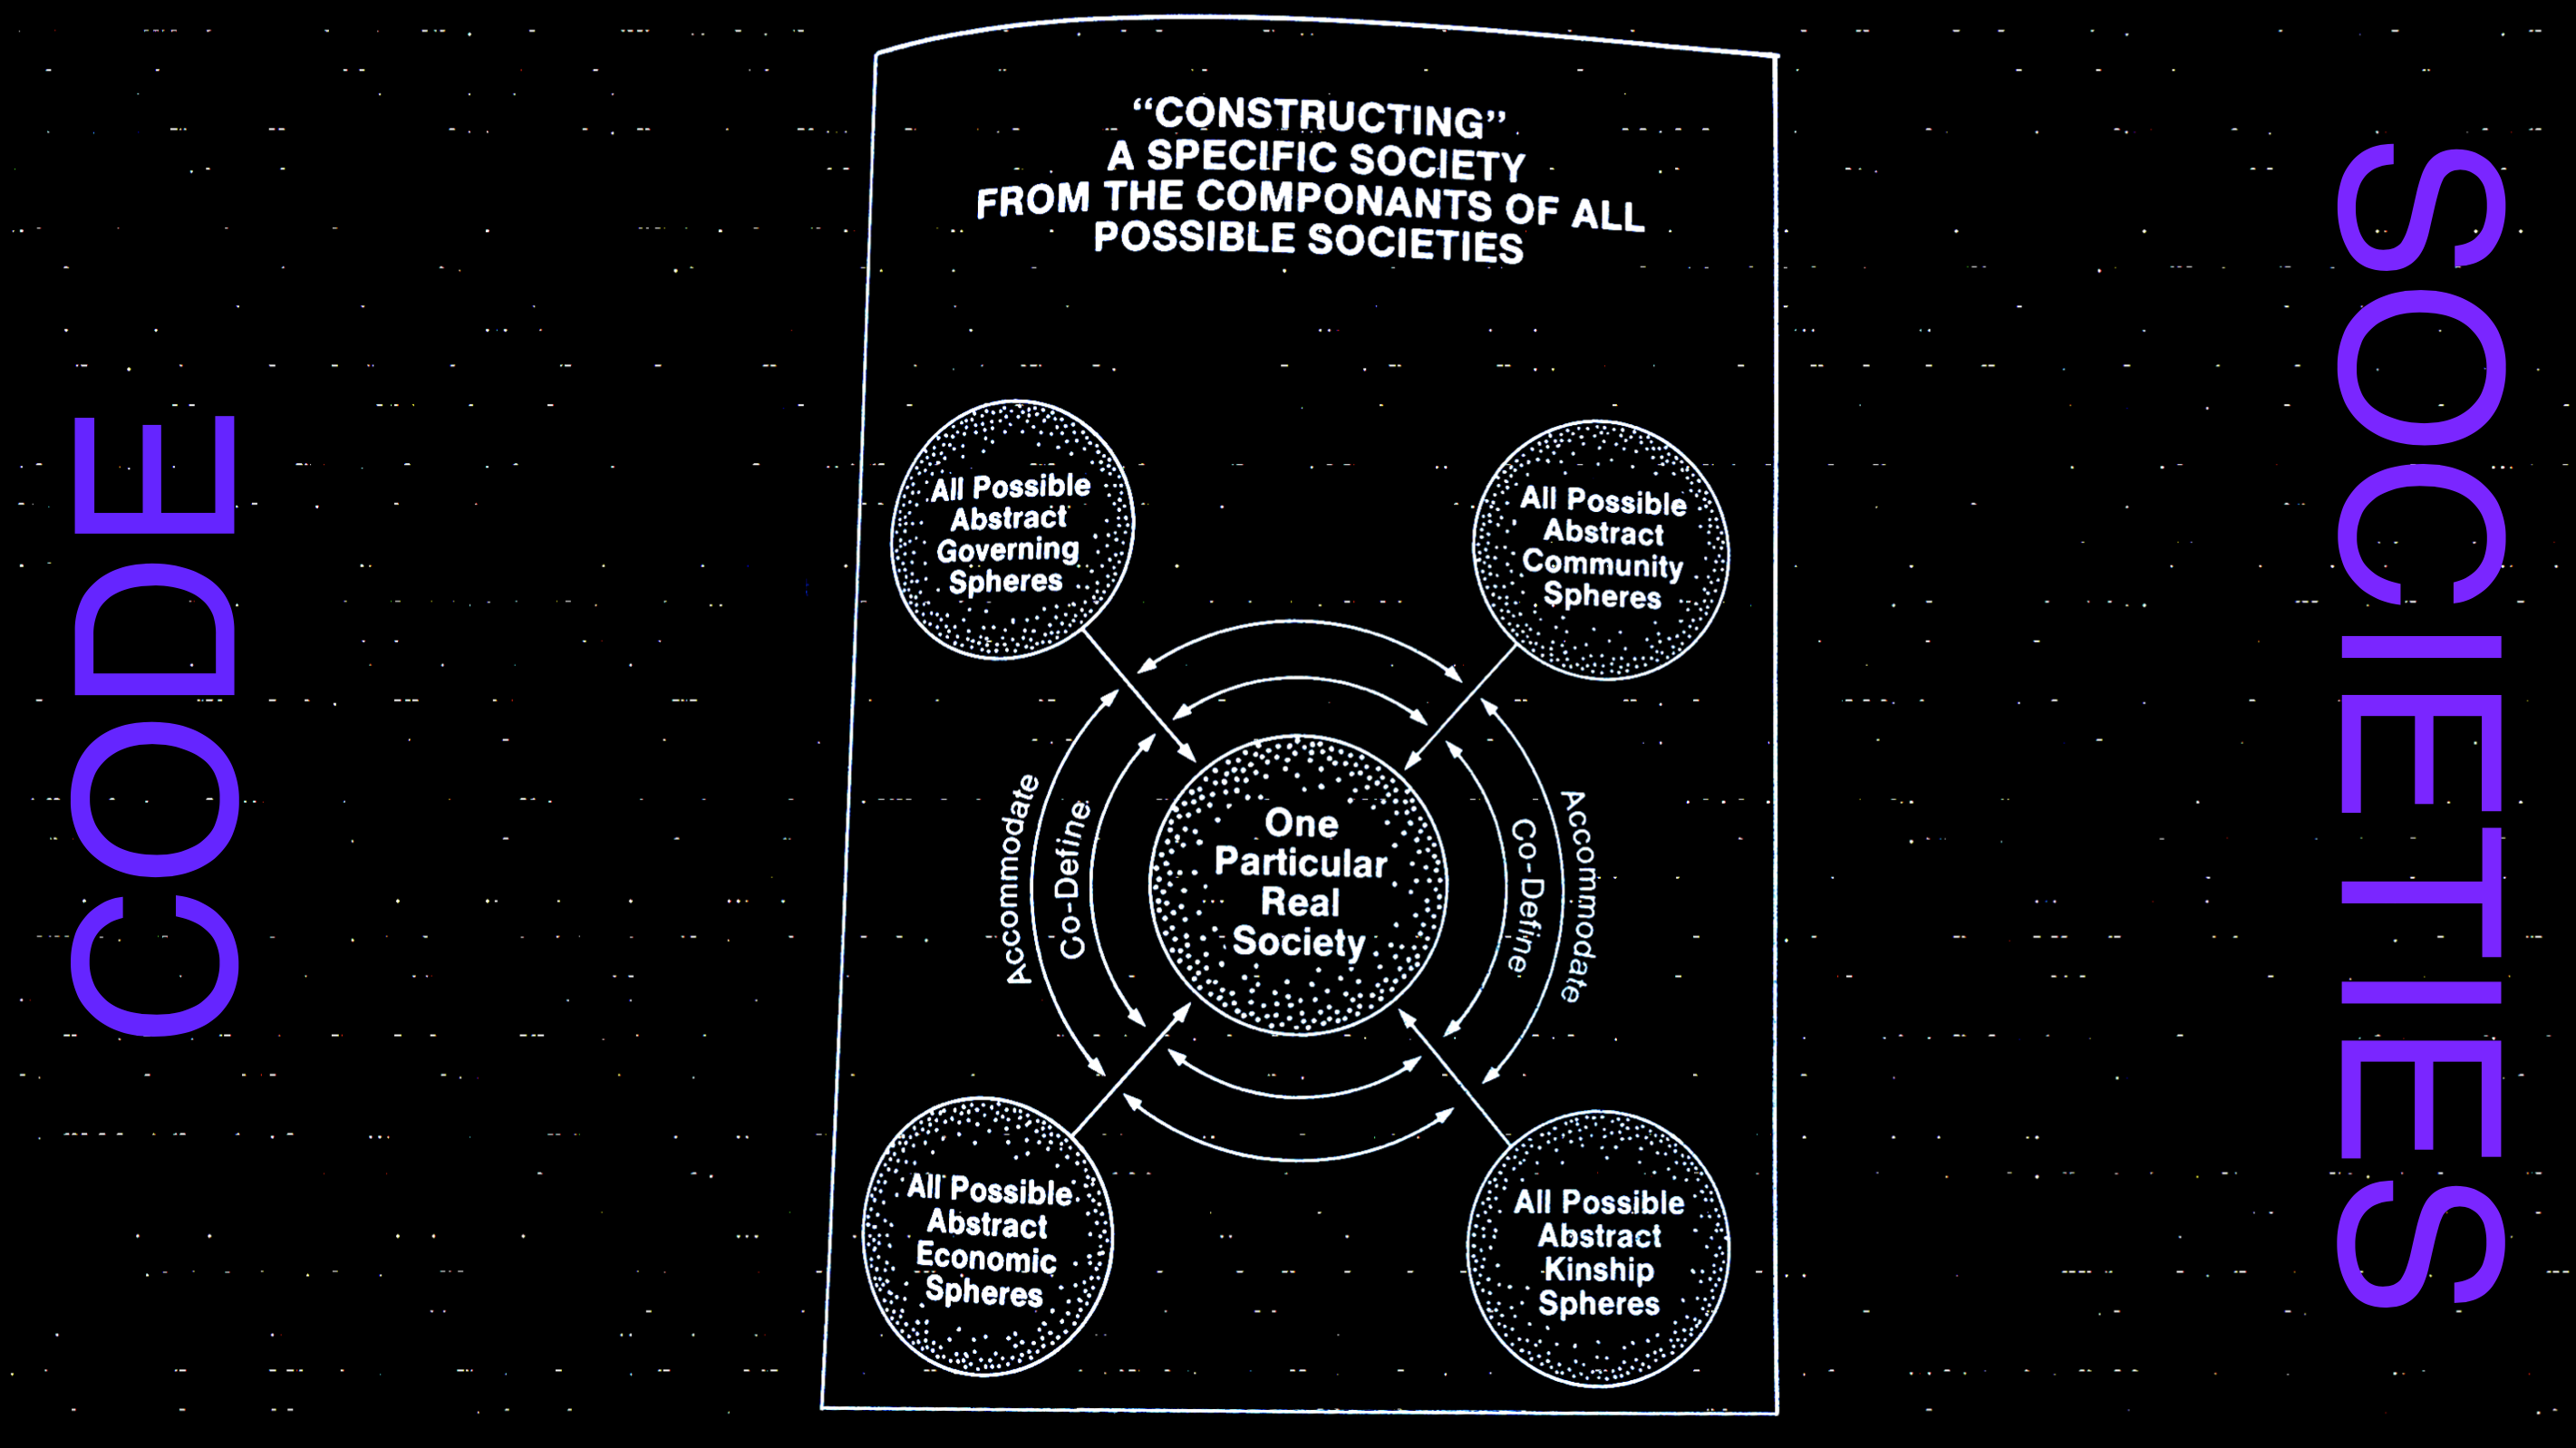 Cunstructing a society from all possible societies graphic